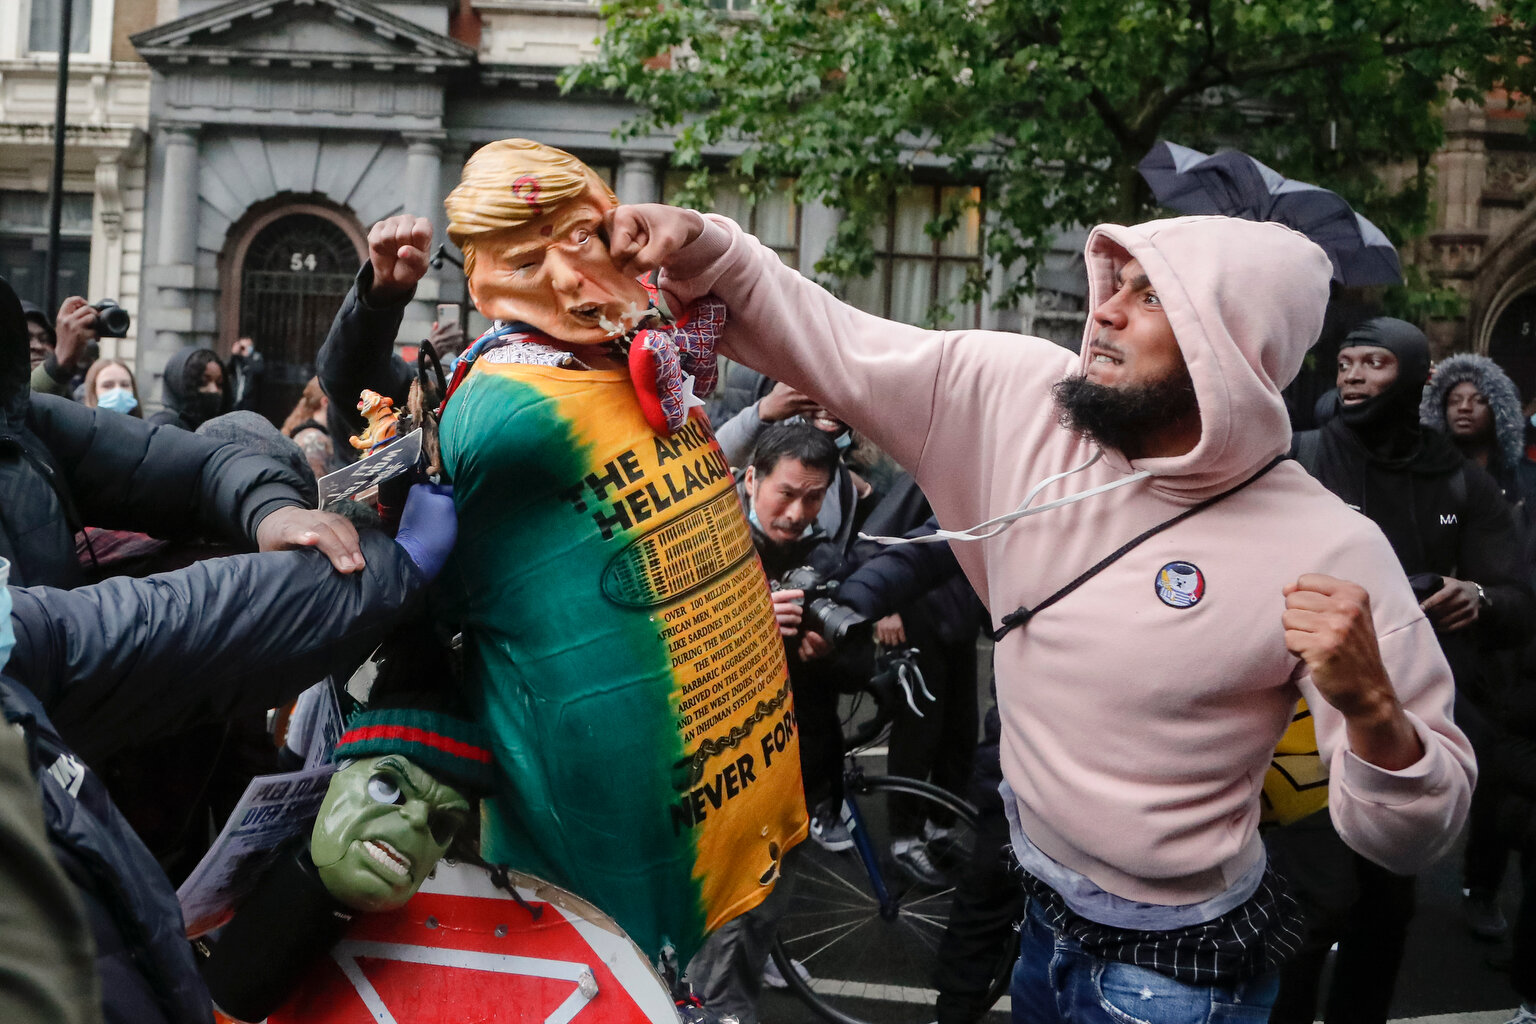  A demonstrator punches a puppet depicting US President Donald Trump during a Black Lives Matter march in London, Saturday, June 6, 2020, as people protest against the killing of George Floyd by police officers in Minneapolis, USA. Floyd, a black man